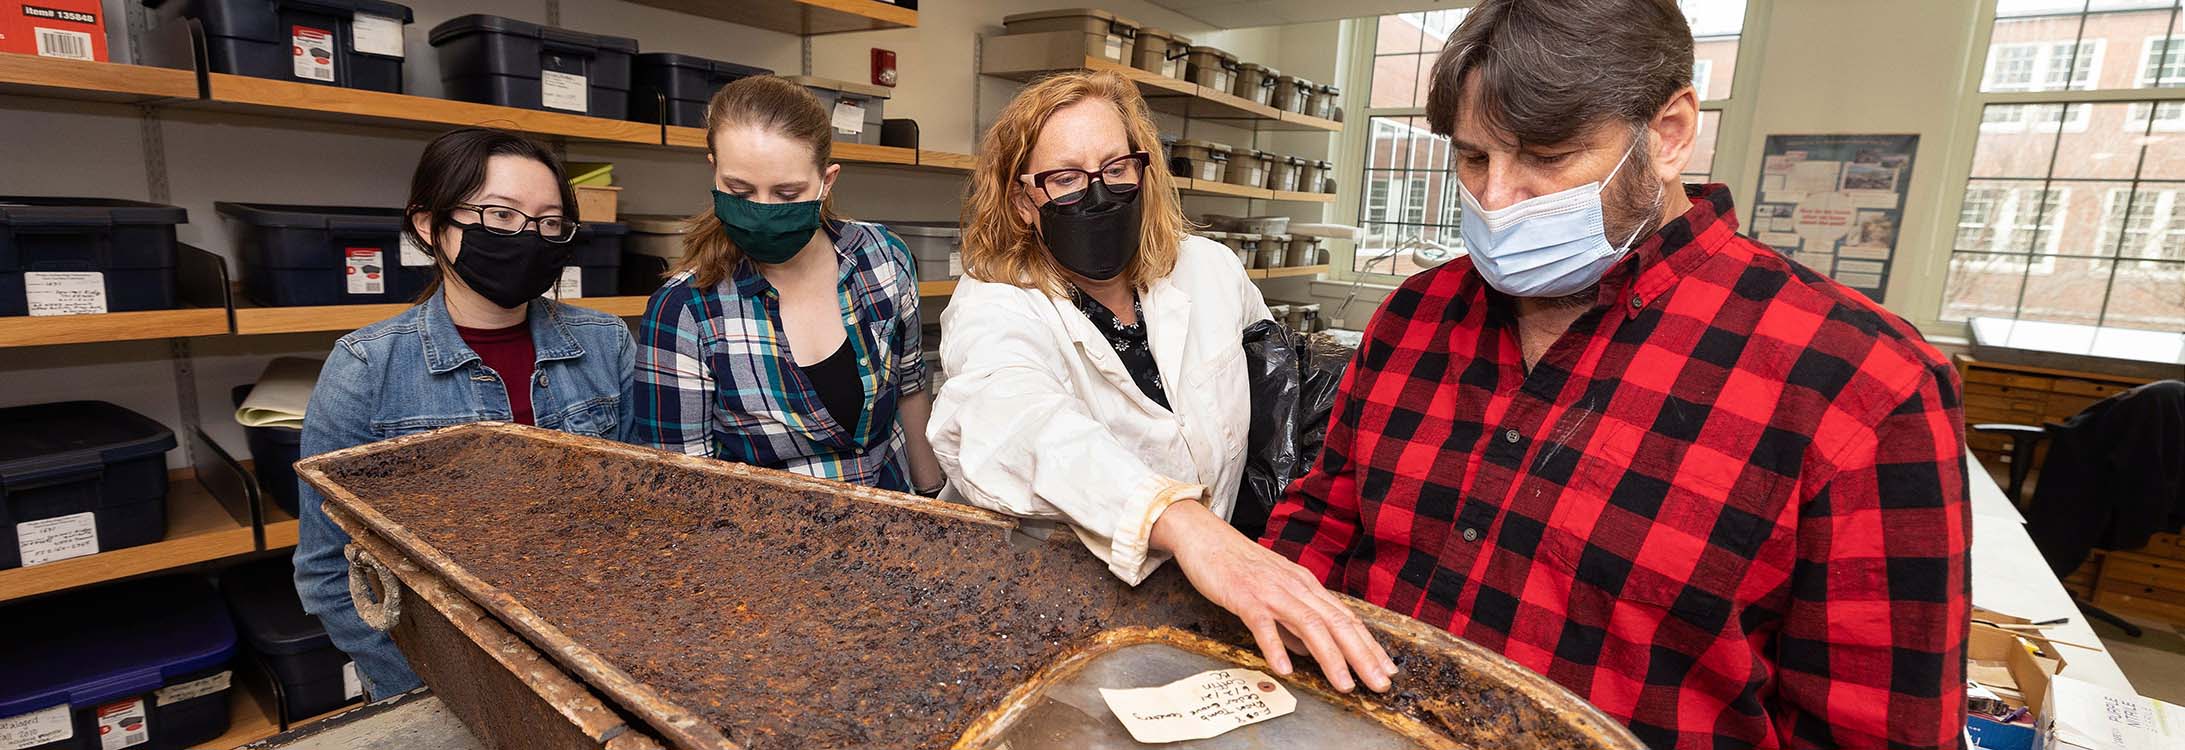 Dr. Megan Perry talks about a coffin, recovered from the Rhem family ancestral tomb in New Bern’s Cedar Grove cemetery, with family member Michael Miller, right, and anthropology graduate students Bridget Cone and Ceara Nicholson.